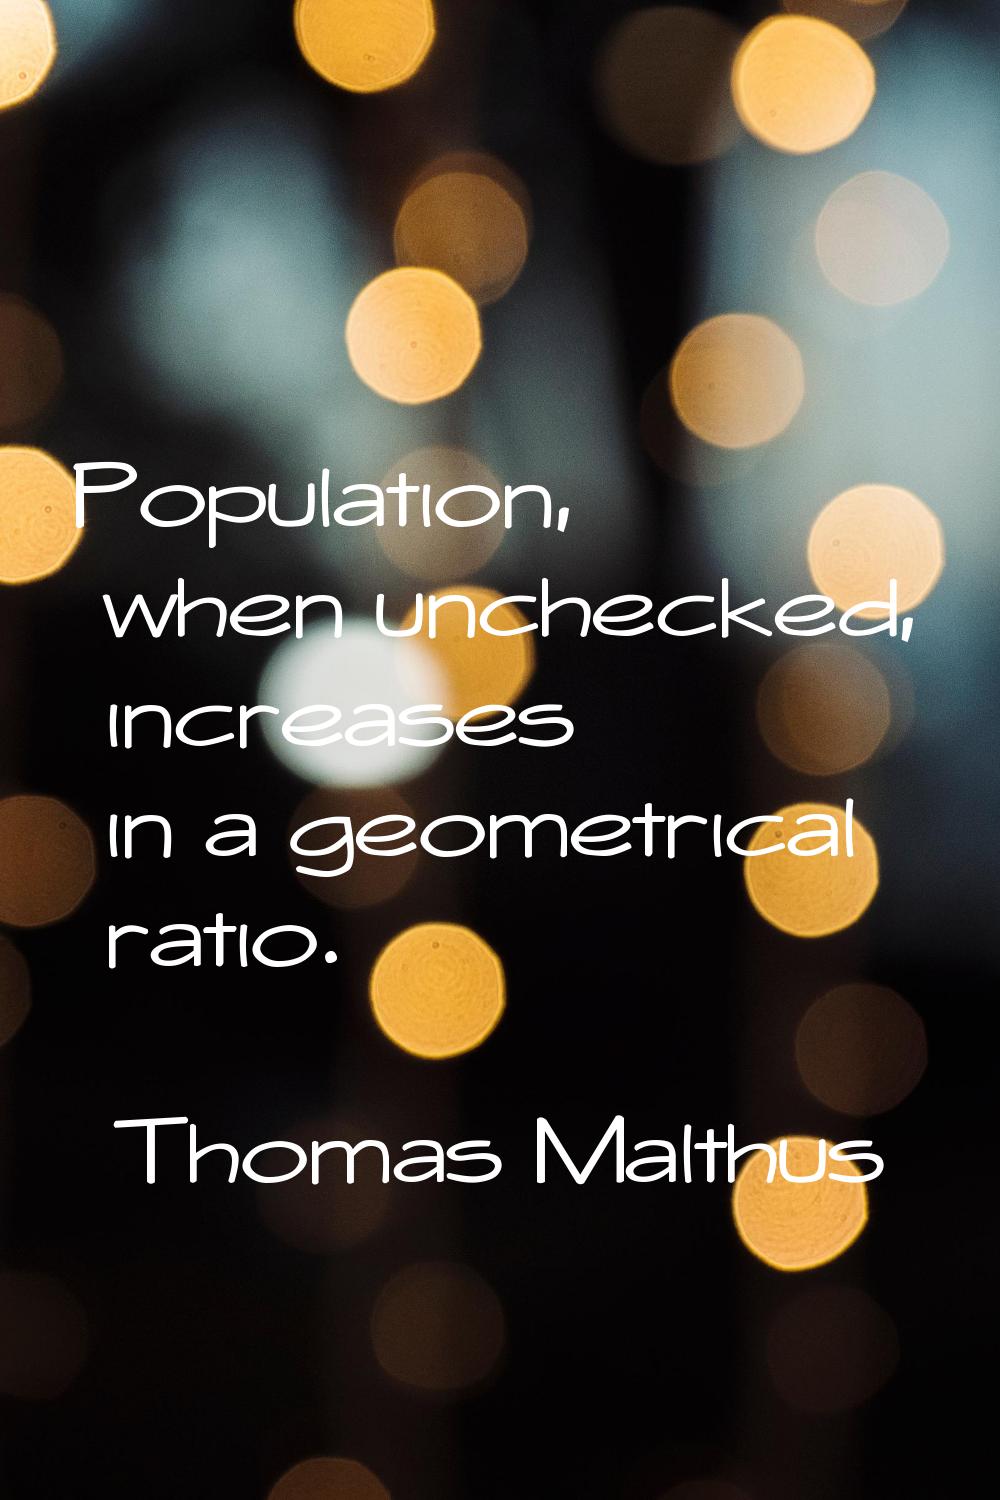 Population, when unchecked, increases in a geometrical ratio.